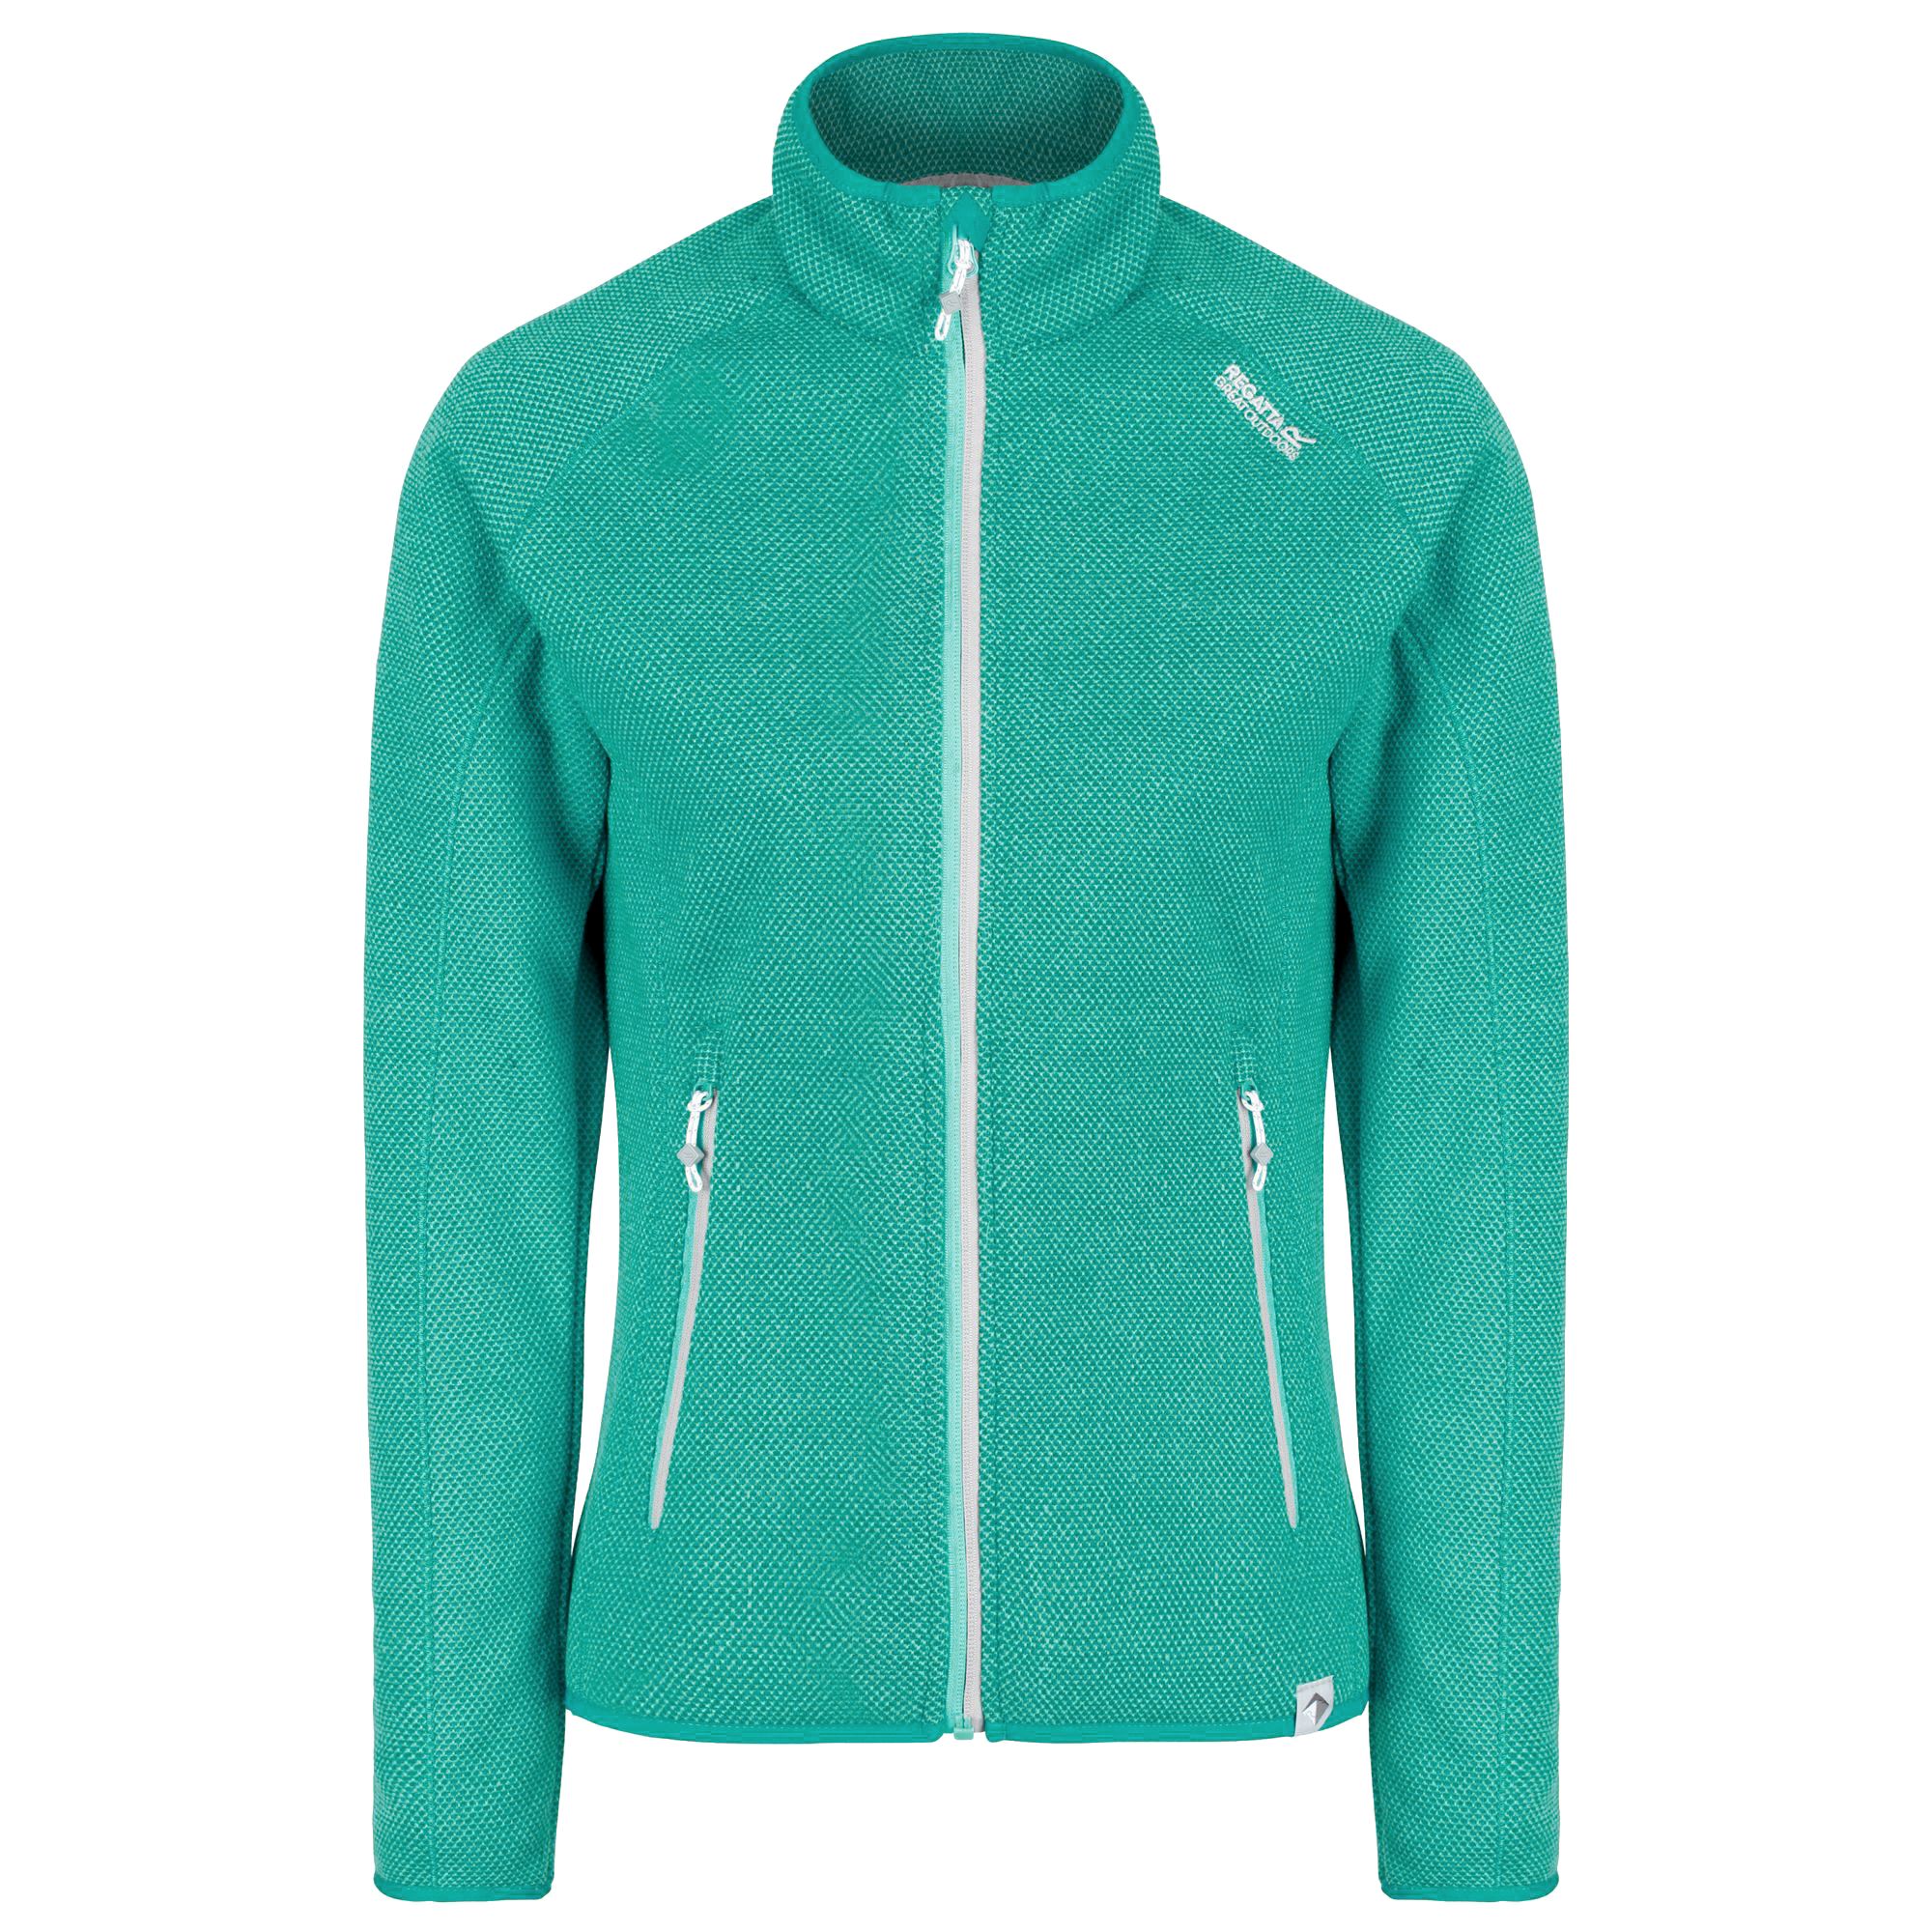 Soft-wearing midlayer two tone fleece. 2 zipped lower pockets. Stretch binding to collar, cuffs and hem. 100% polyester.